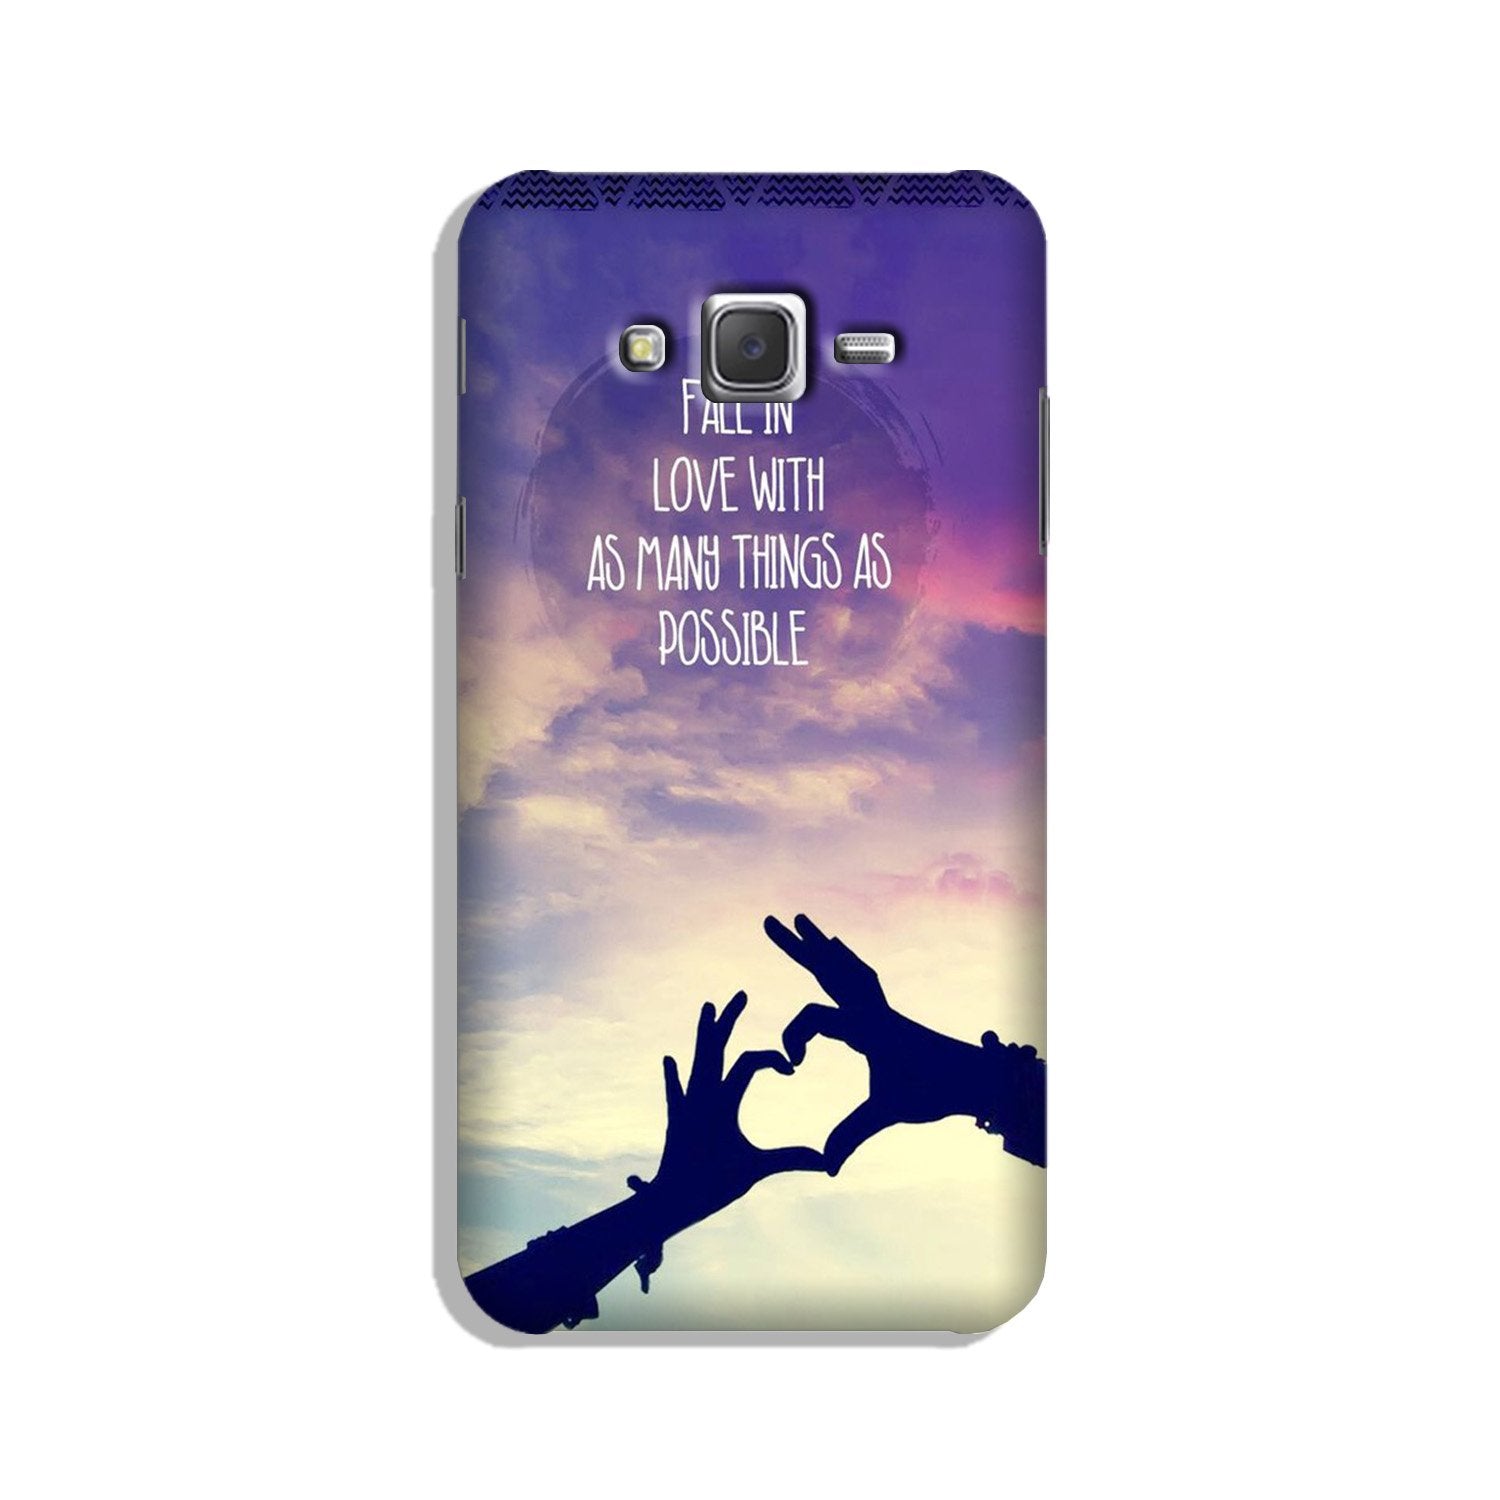 Fall in love Case for Galaxy J3 (2015)